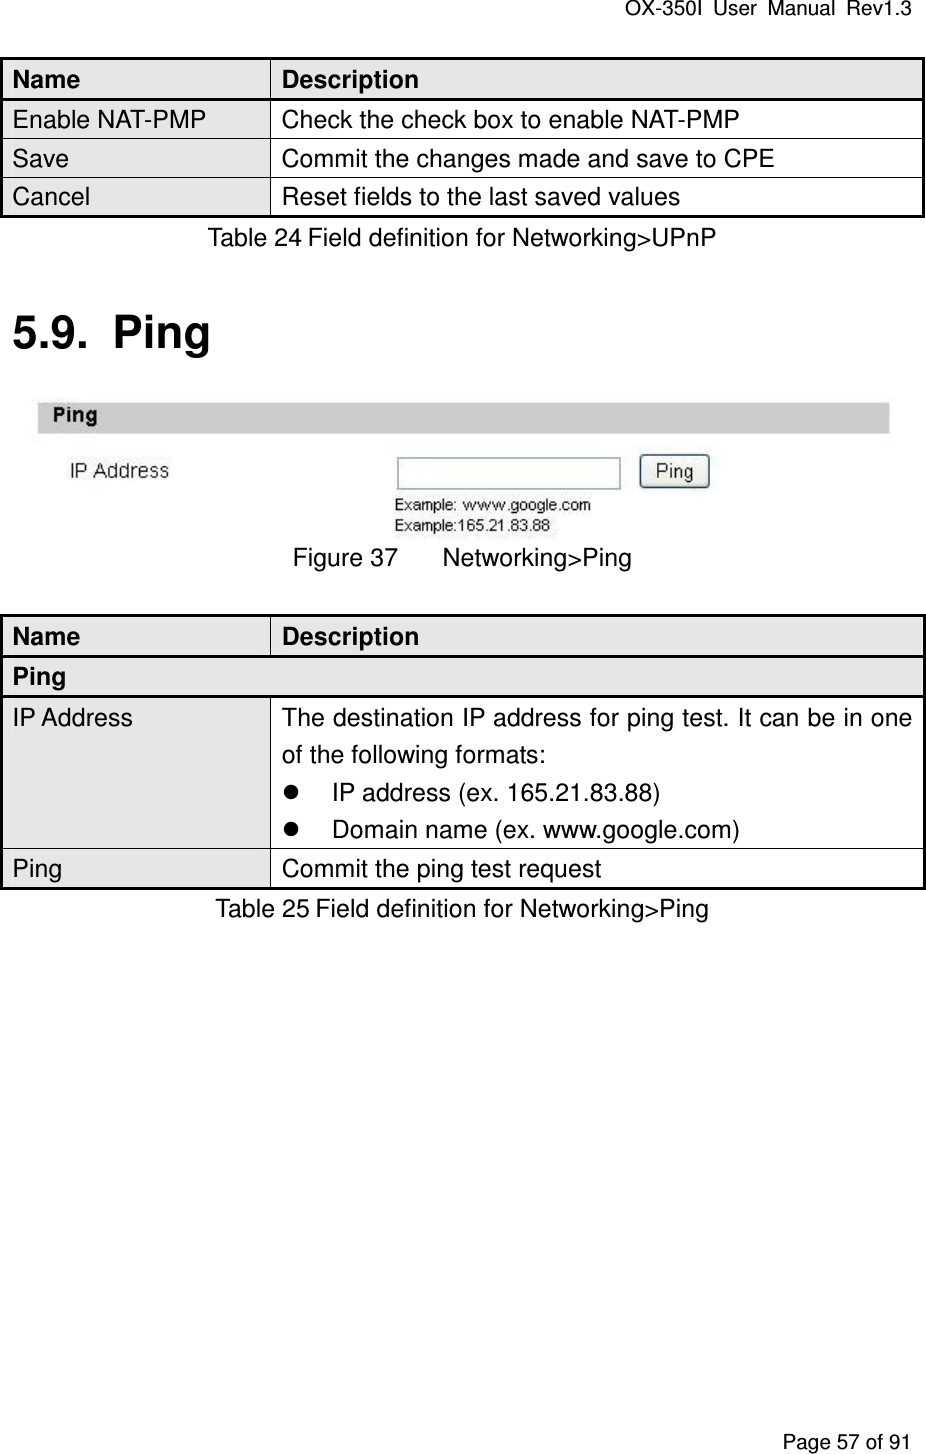 OX-350I  User  Manual  Rev1.3 Page 57 of 91 Name  Description Enable NAT-PMP  Check the check box to enable NAT-PMP Save  Commit the changes made and save to CPE Cancel  Reset fields to the last saved values Table 24 Field definition for Networking&gt;UPnP 5.9.  Ping  Figure 37  Networking&gt;Ping Name  Description Ping IP Address  The destination IP address for ping test. It can be in one of the following formats:   IP address (ex. 165.21.83.88)   Domain name (ex. www.google.com) Ping  Commit the ping test request Table 25 Field definition for Networking&gt;Ping 